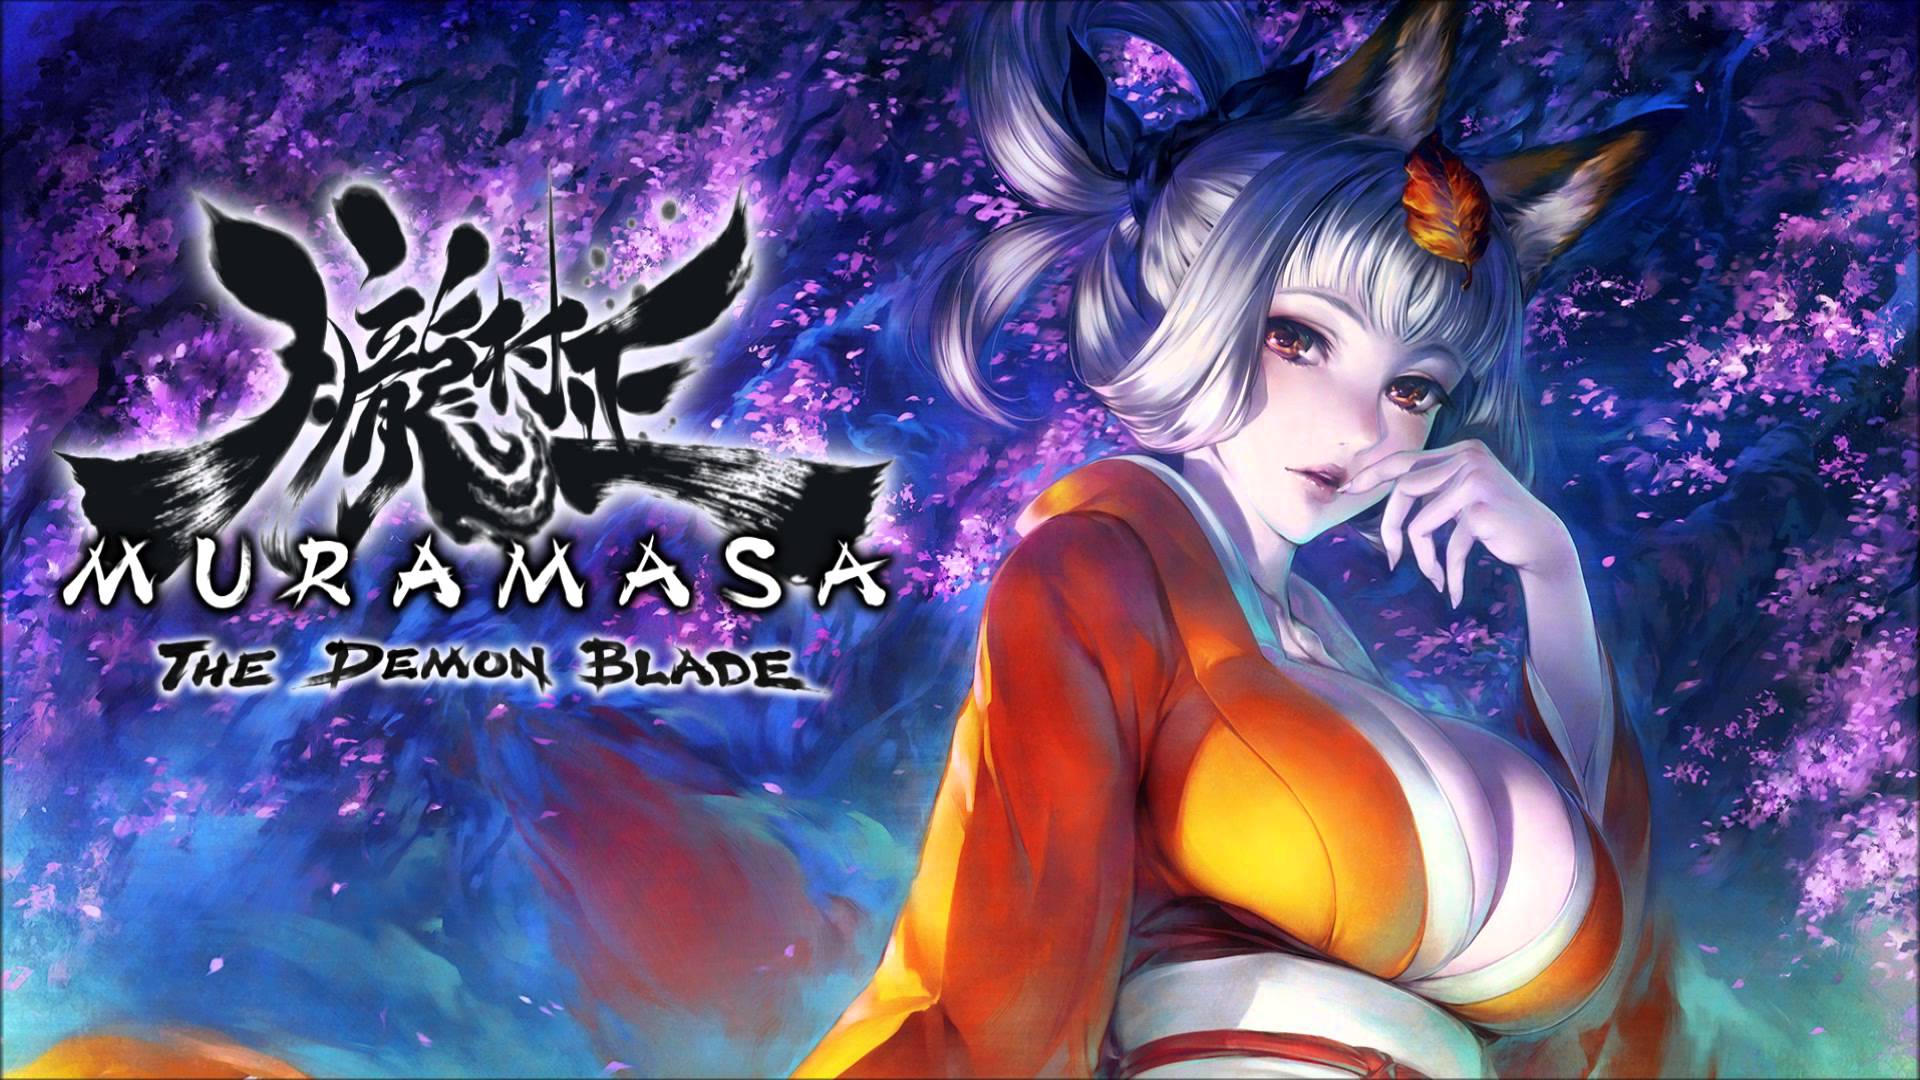 Muramasa Backgrounds, Compatible - PC, Mobile, Gadgets| 1920x1080 px